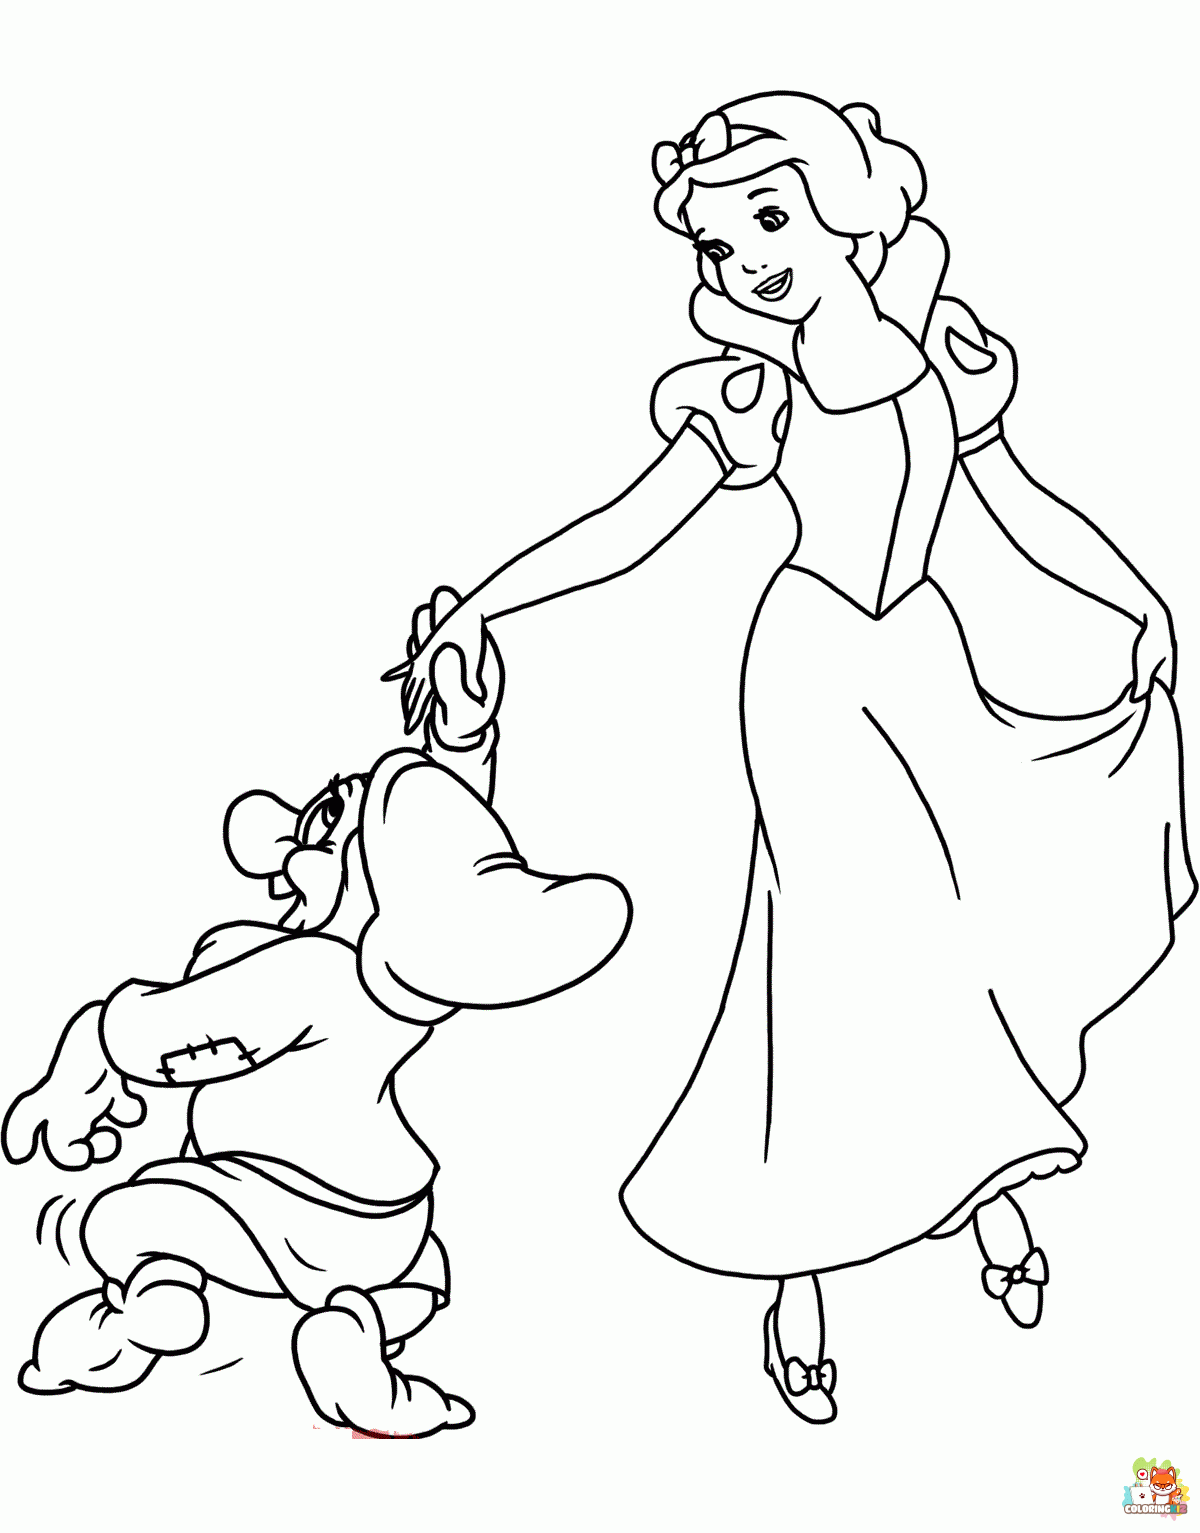 Dancing Snow White coloring pages 1